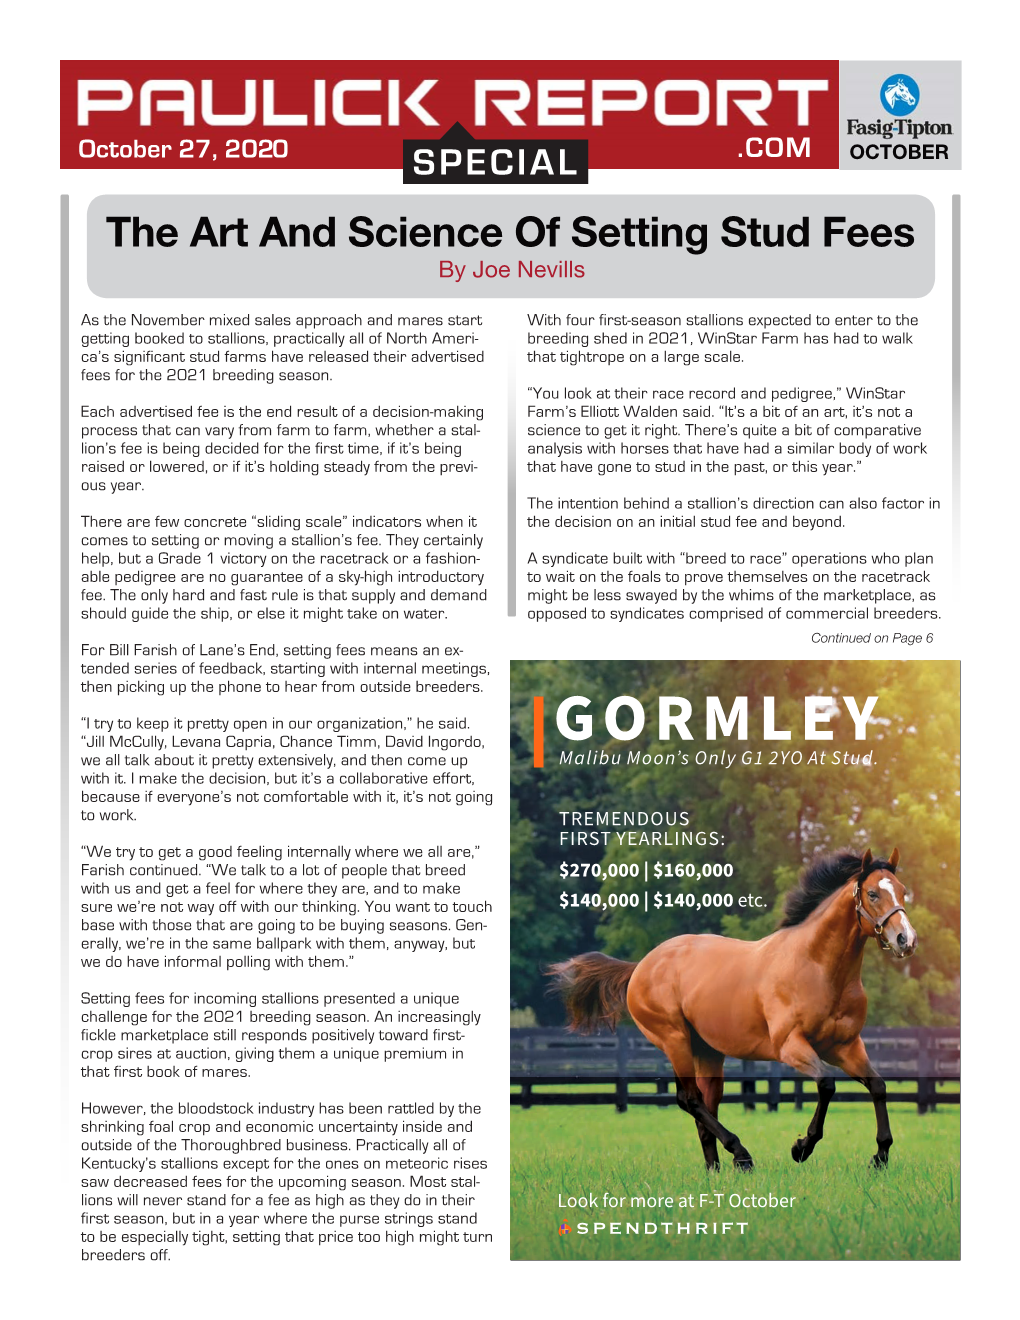 GORMLEY We All Talk About It Pretty Extensively, and Then Come up Malibu Moon’S Only G1 2YO at Stud